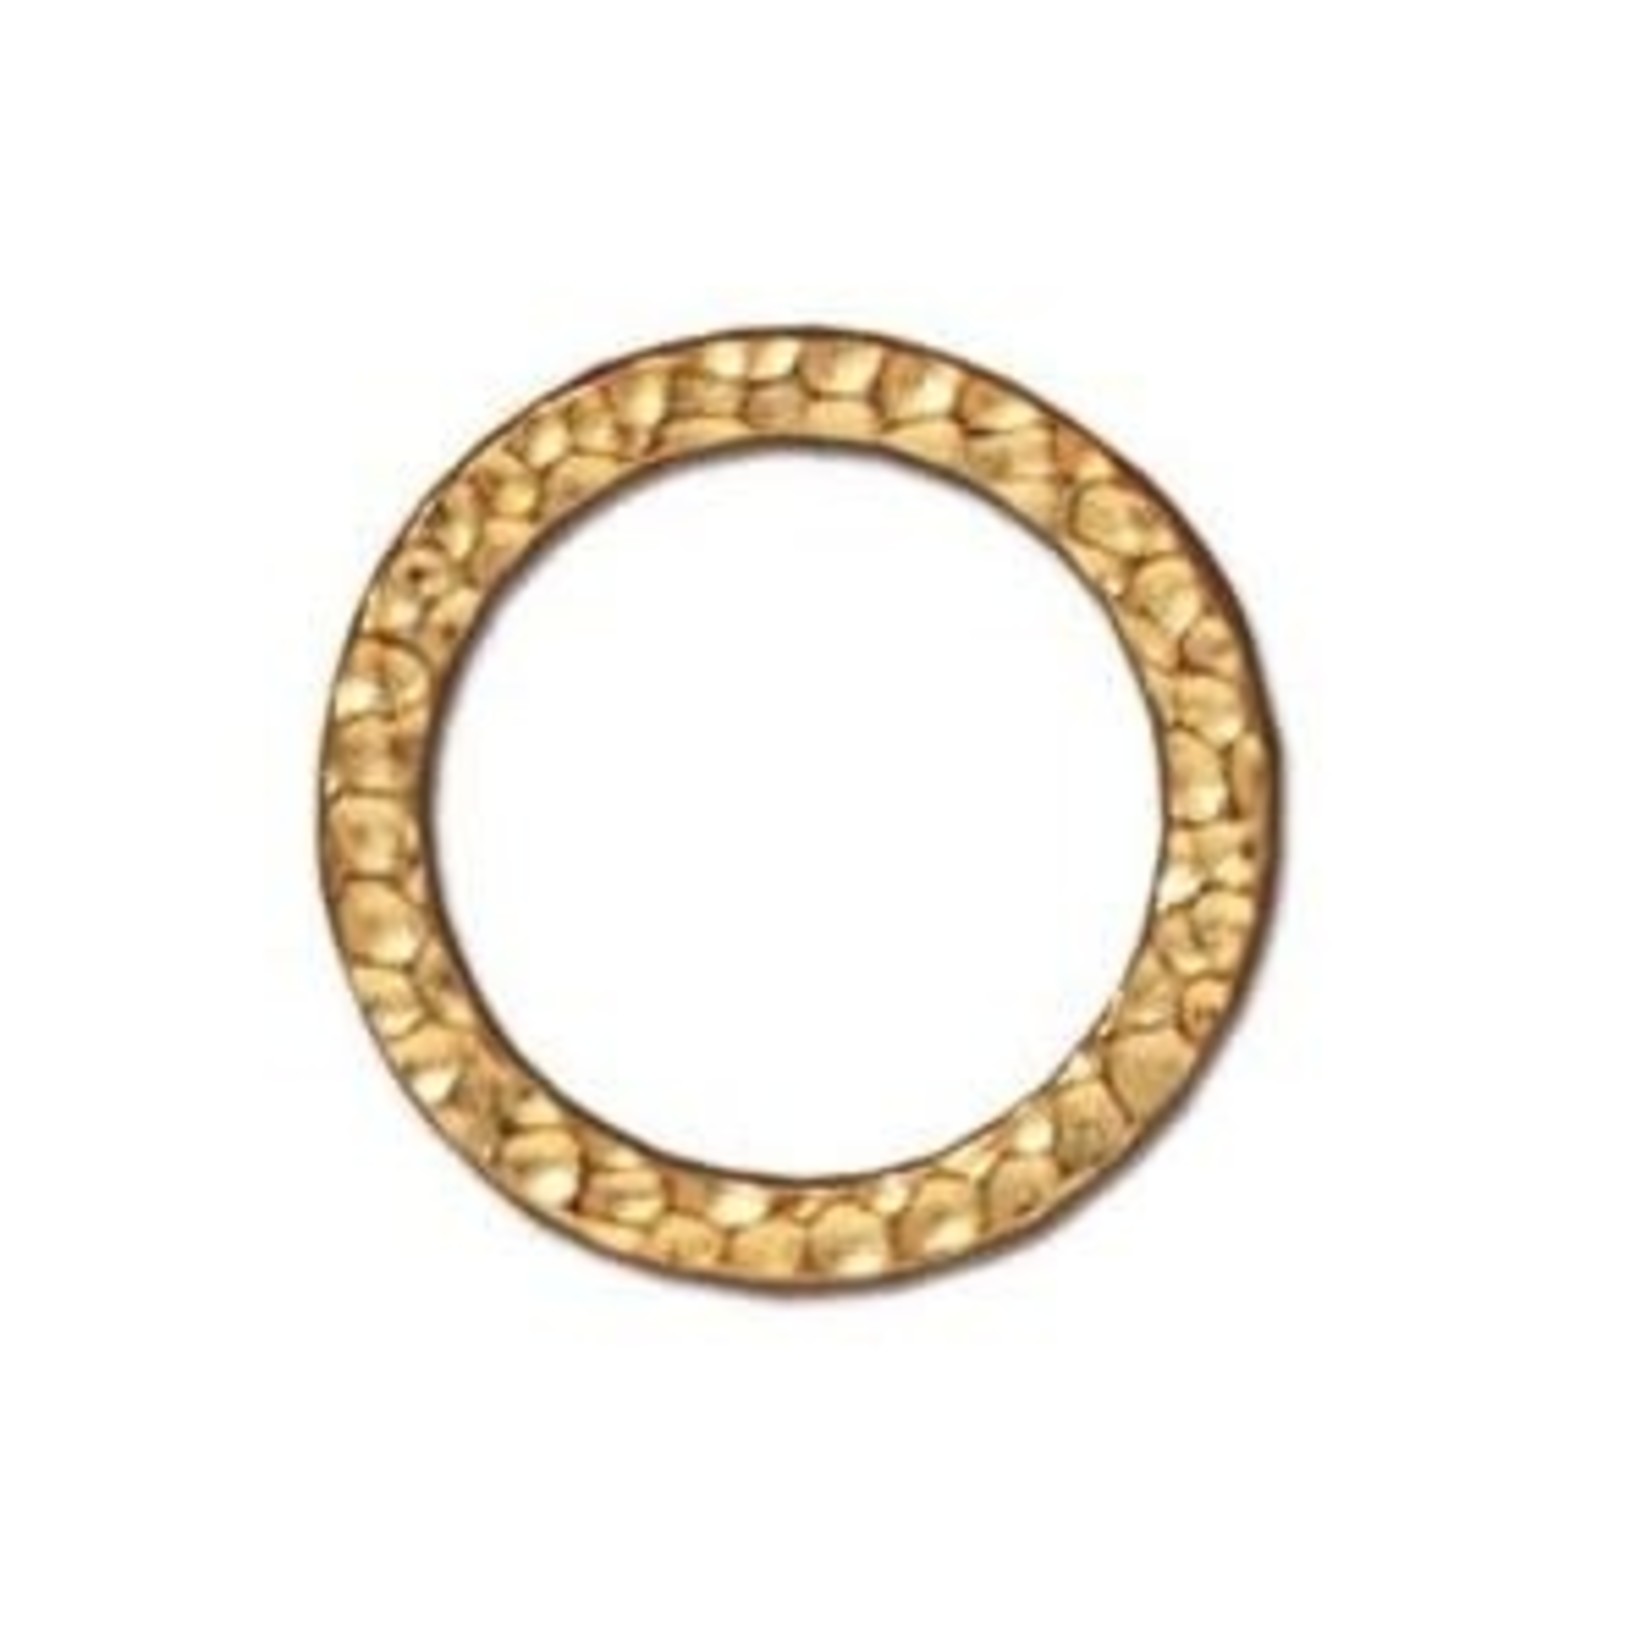 TierraCast Tierracast Gold Plated Hammertone Large Ring